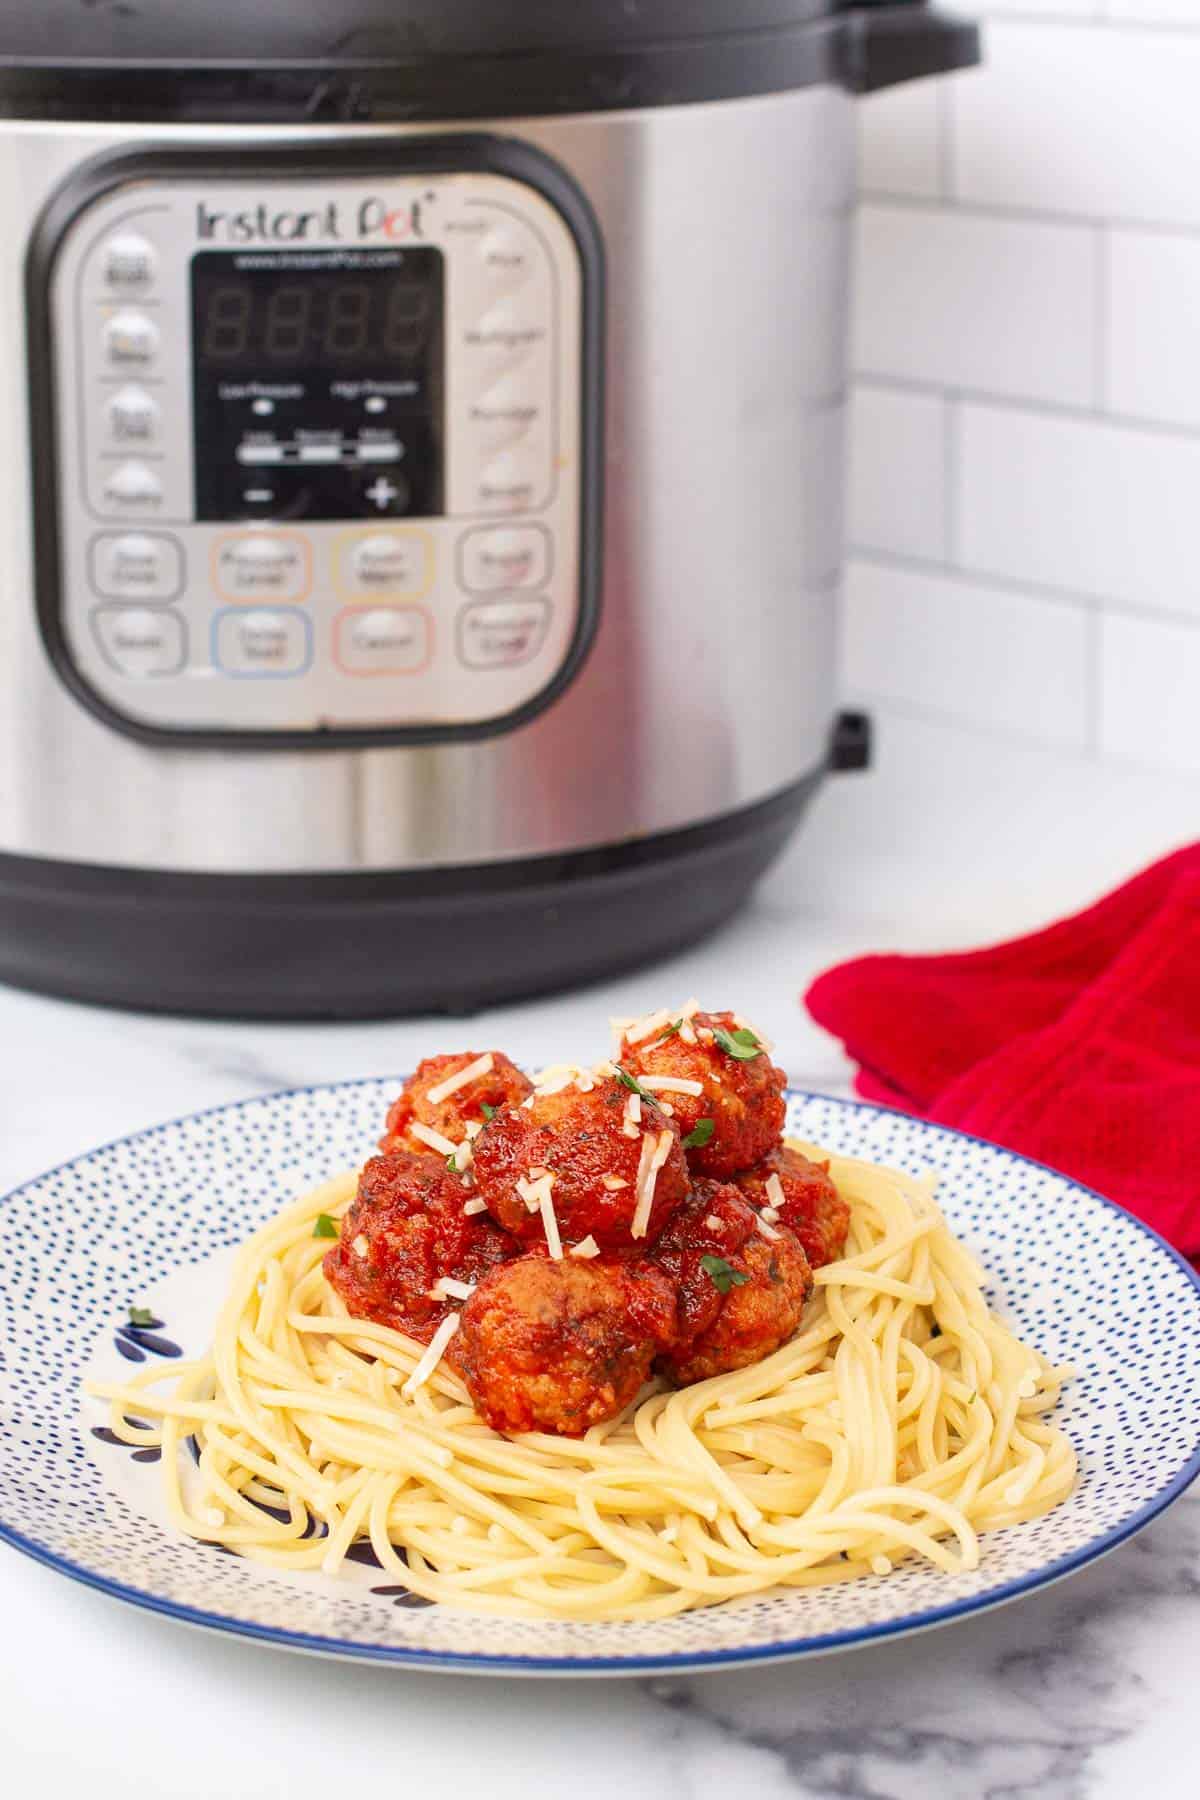 Meatballs coated in pasta sauce served over spaghetti